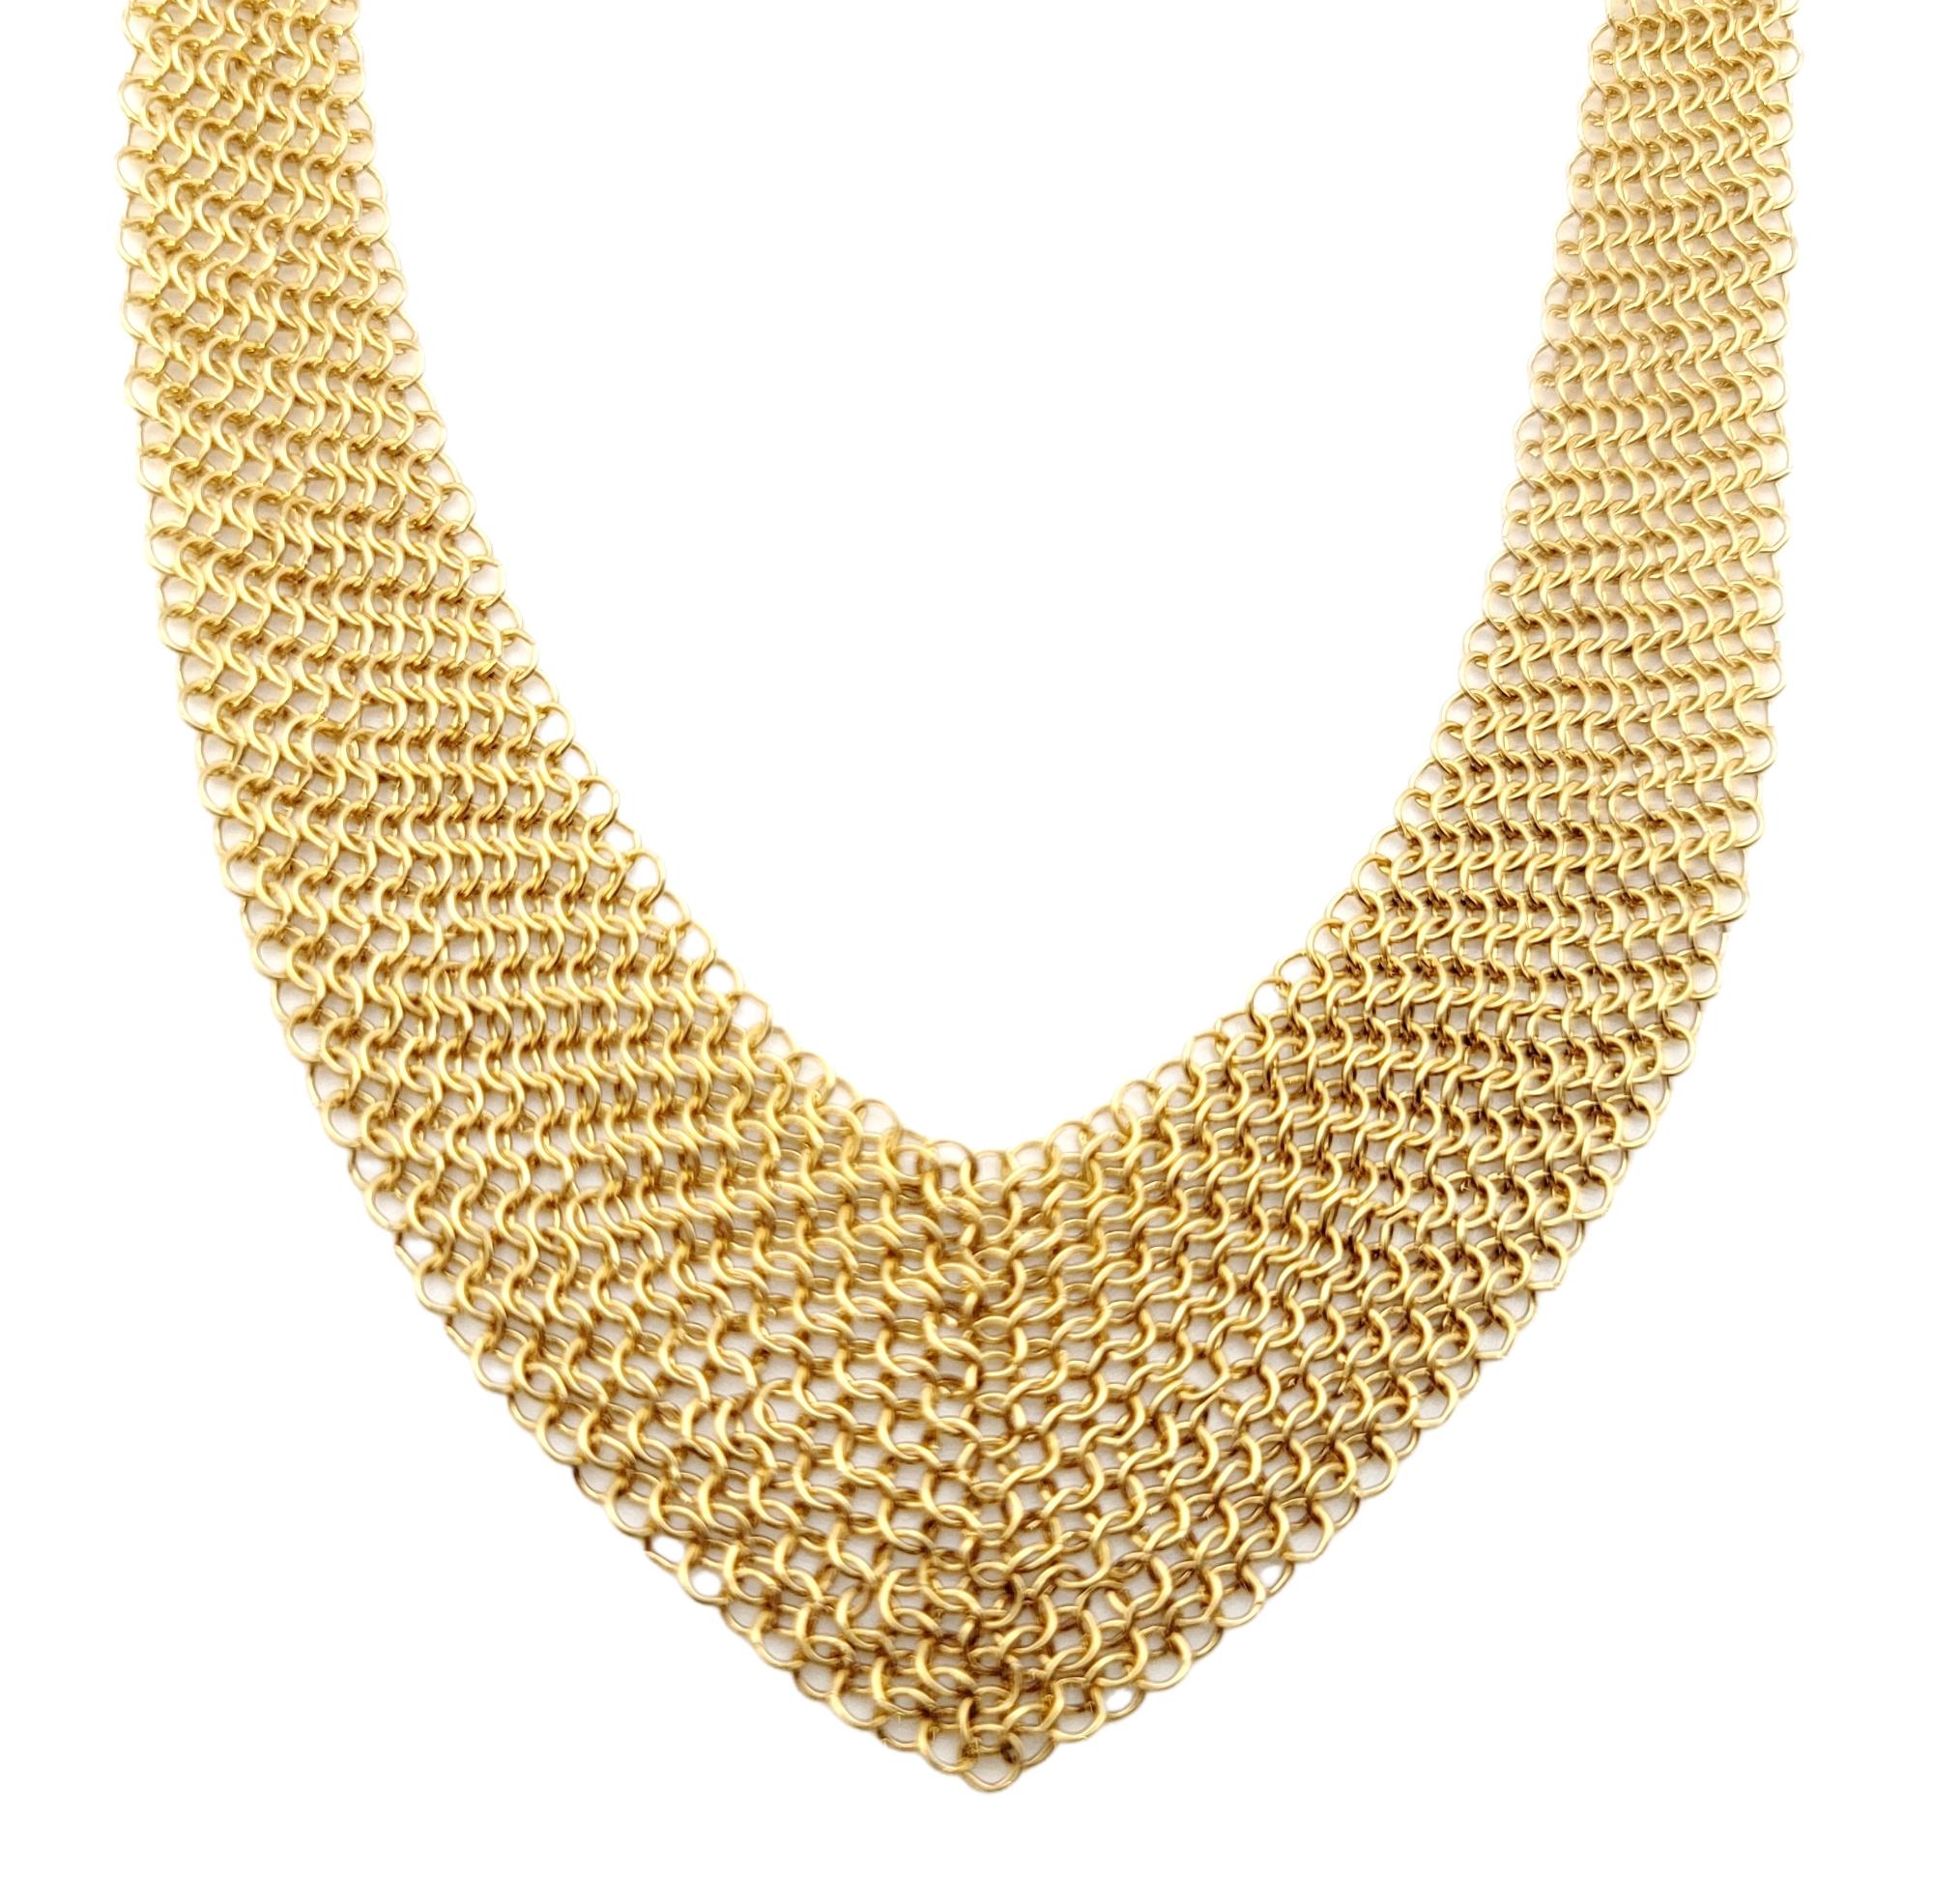 Absolutely stunning 18 karat yellow gold mesh bib necklace designed by Elsa Peretti for Tiffany & Co.. Though delicate in construction, this piece makes a bold statement. The form is malleable and ergonomic in the way it drapes over the body's